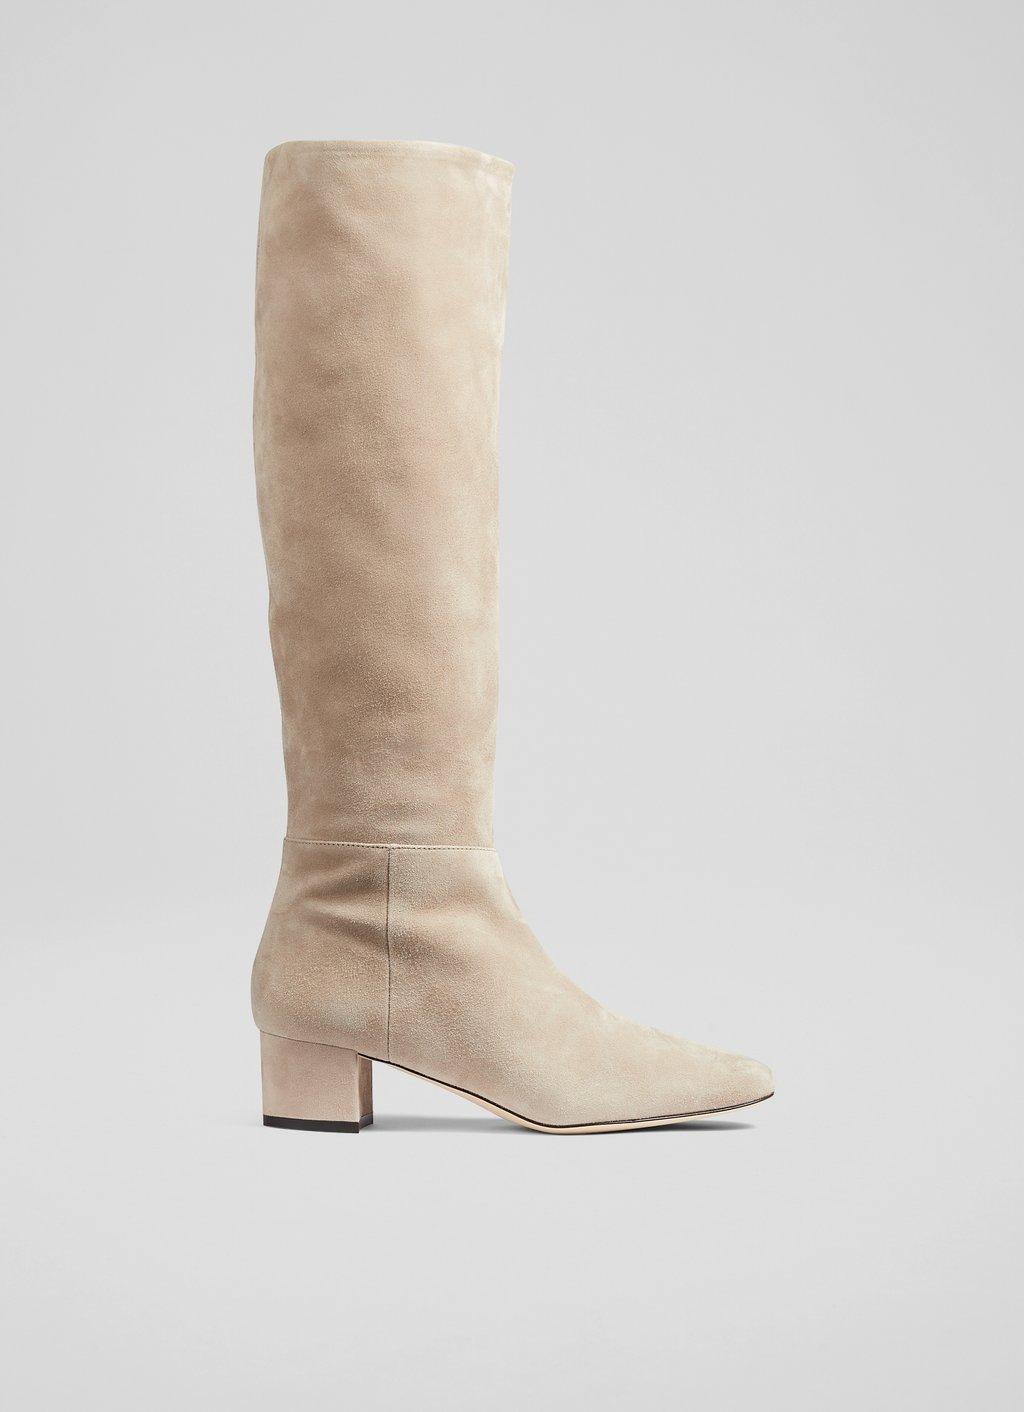 Karen Taupe Suede Knee-High Boots | Boots | Shoes | Collections |  , London